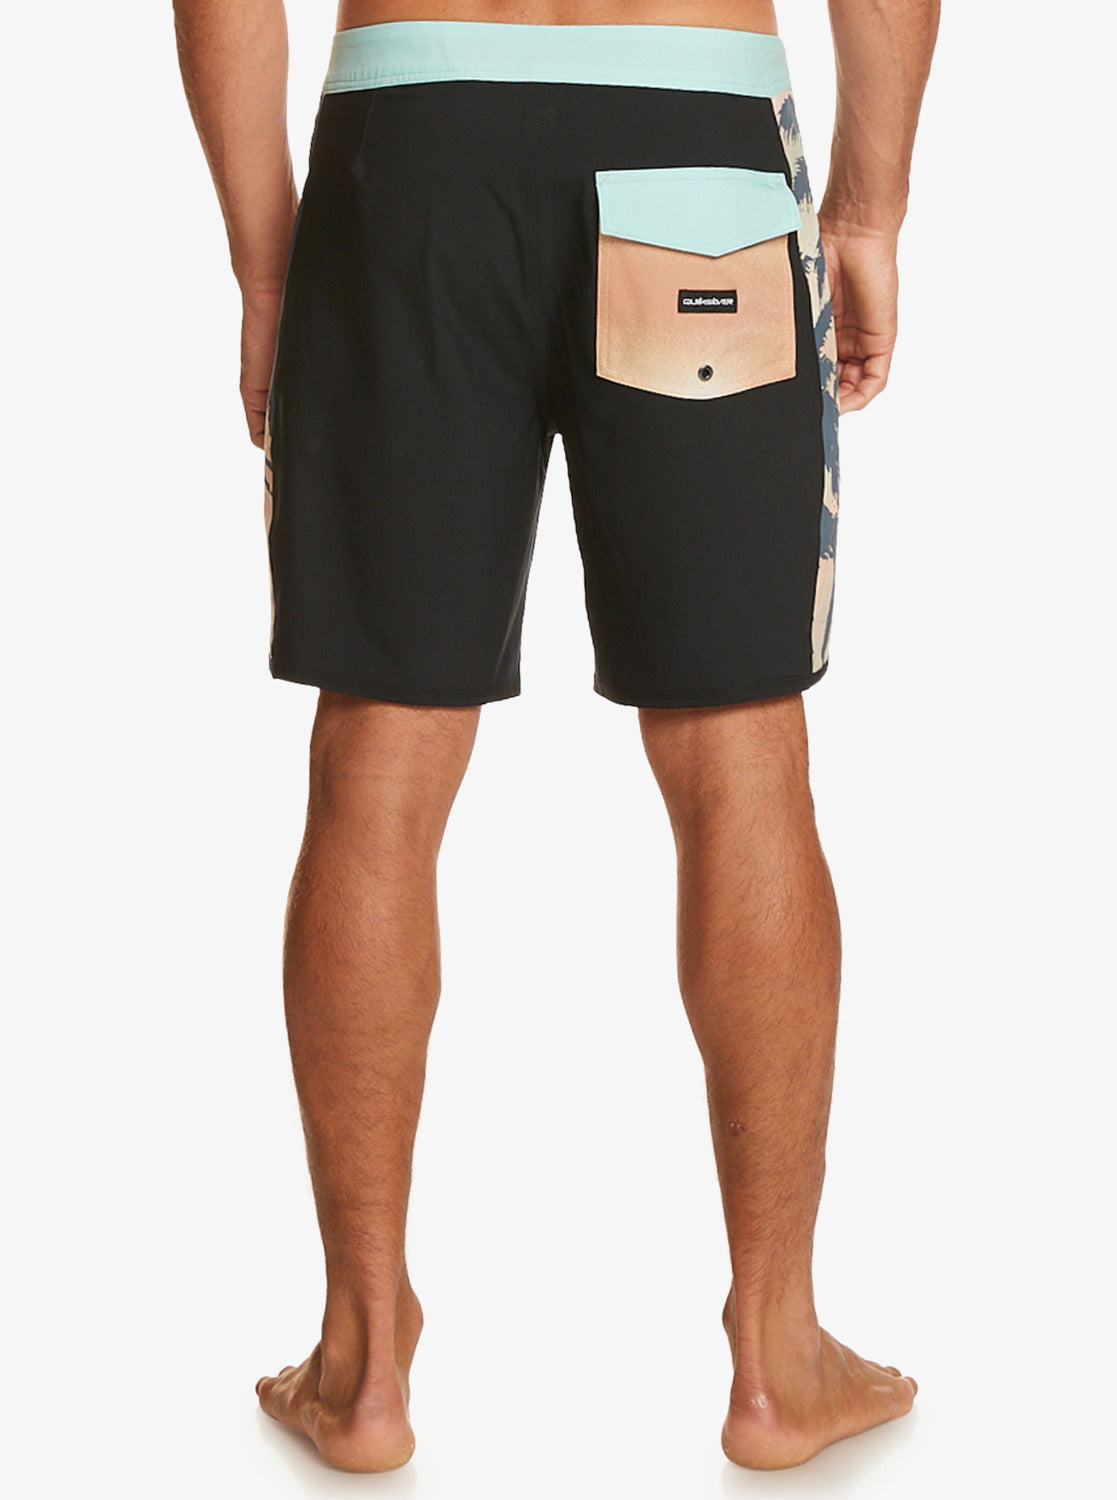 Quiksilver Surfsilk Arch 18" Boardshorts in black from back